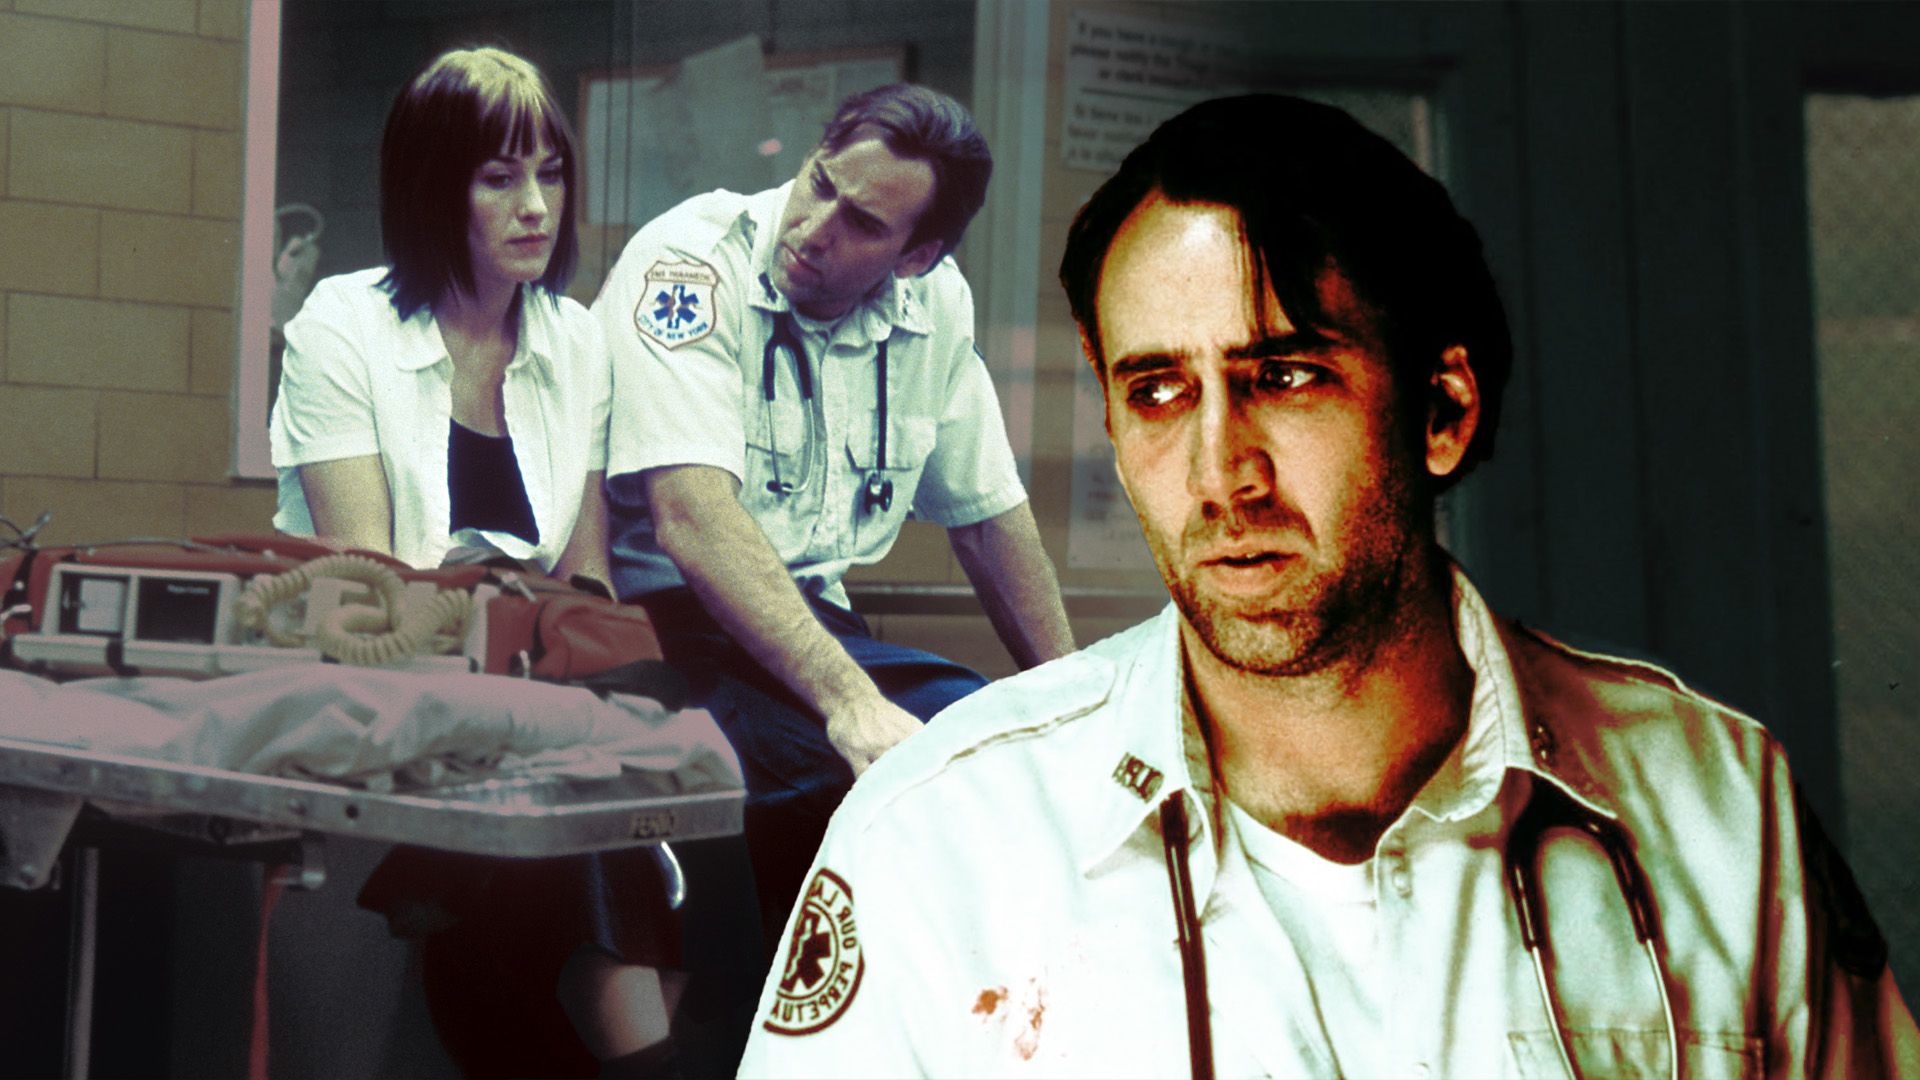 A custom image of Nicolas Cage in Bring Out the Dead